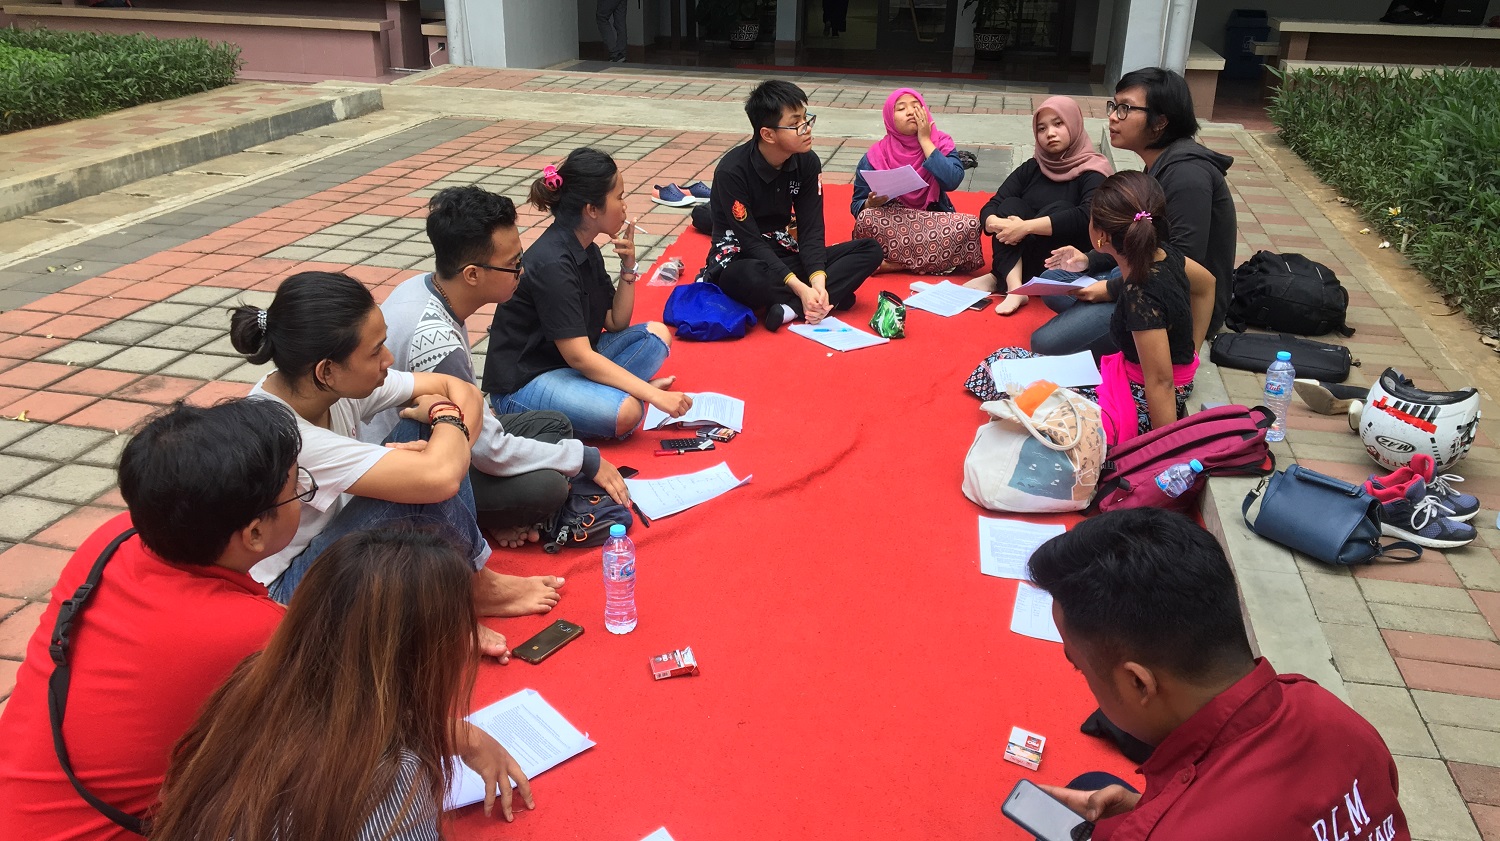 A discussion on latest gender issue in the back garden of FISIP UNAIR on Thursday, April 25, 2019.